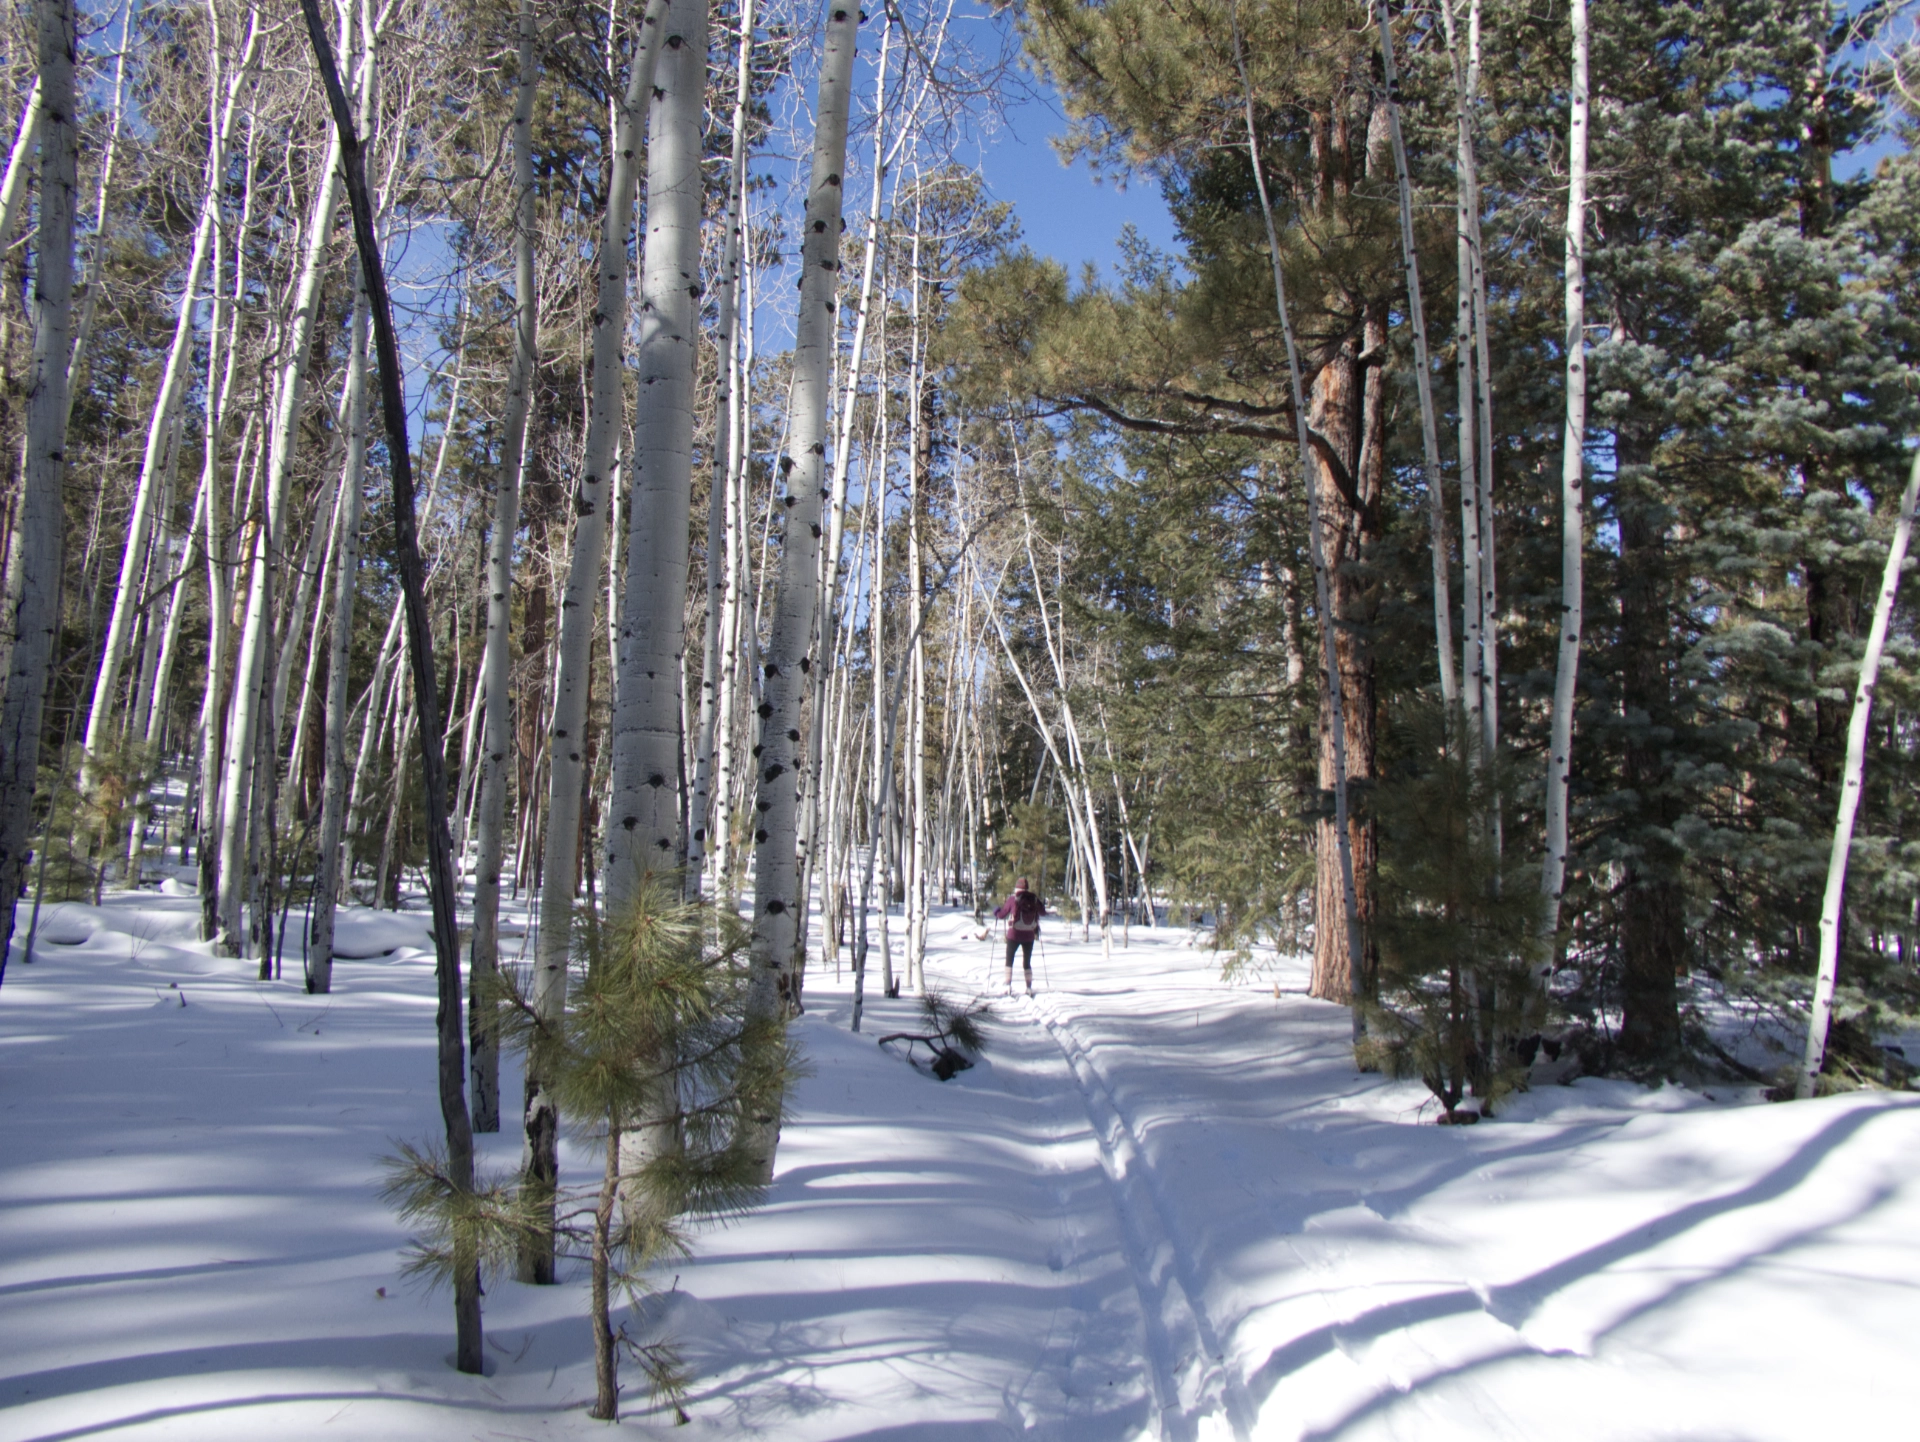 skiing in the aspen forest